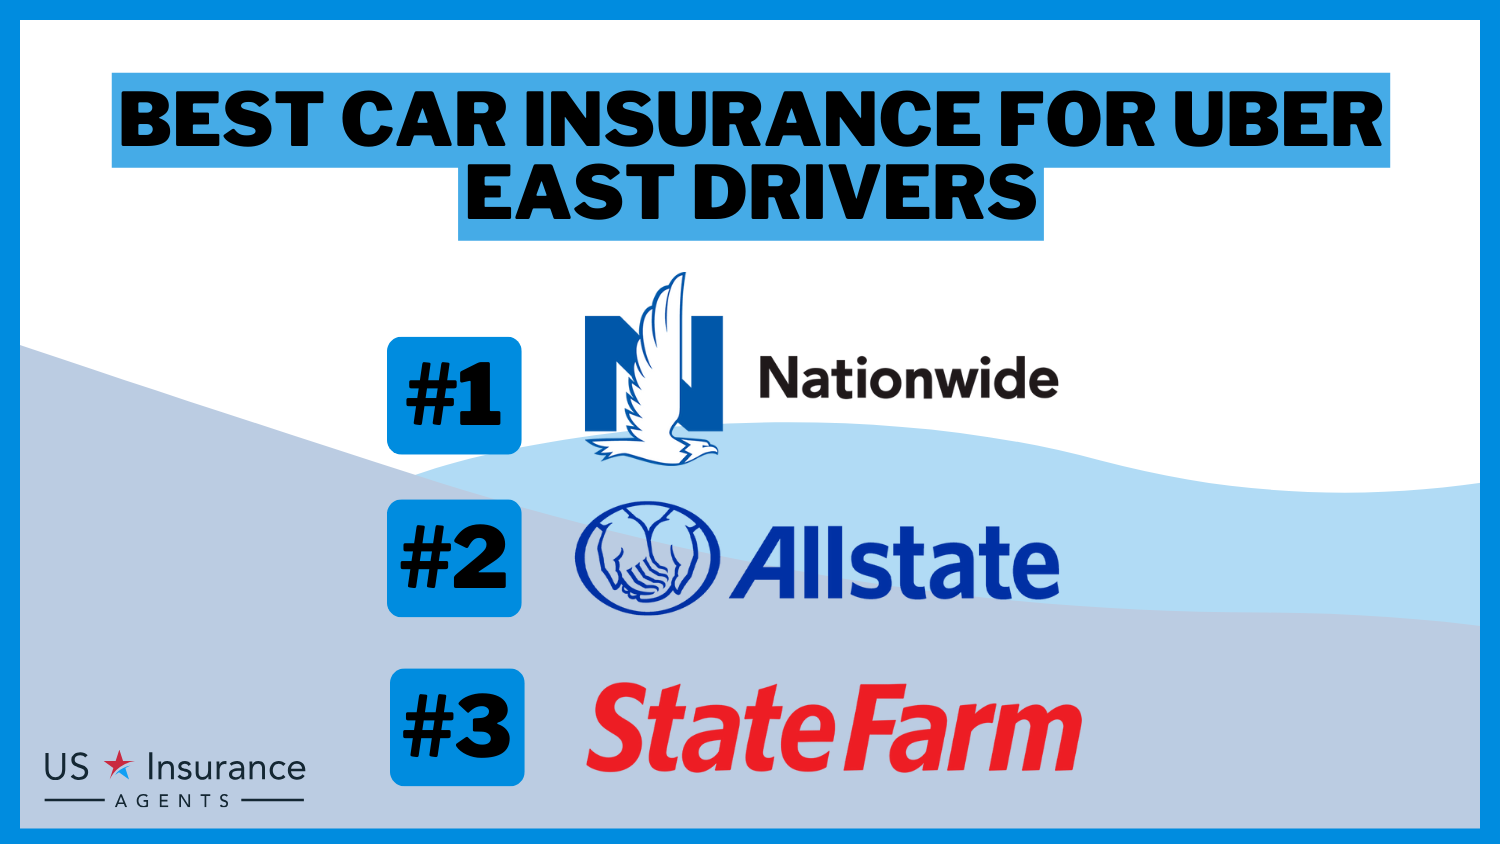 Best Car Insurance for Uber East Drivers: Nationwide, Allstate, and State Farm